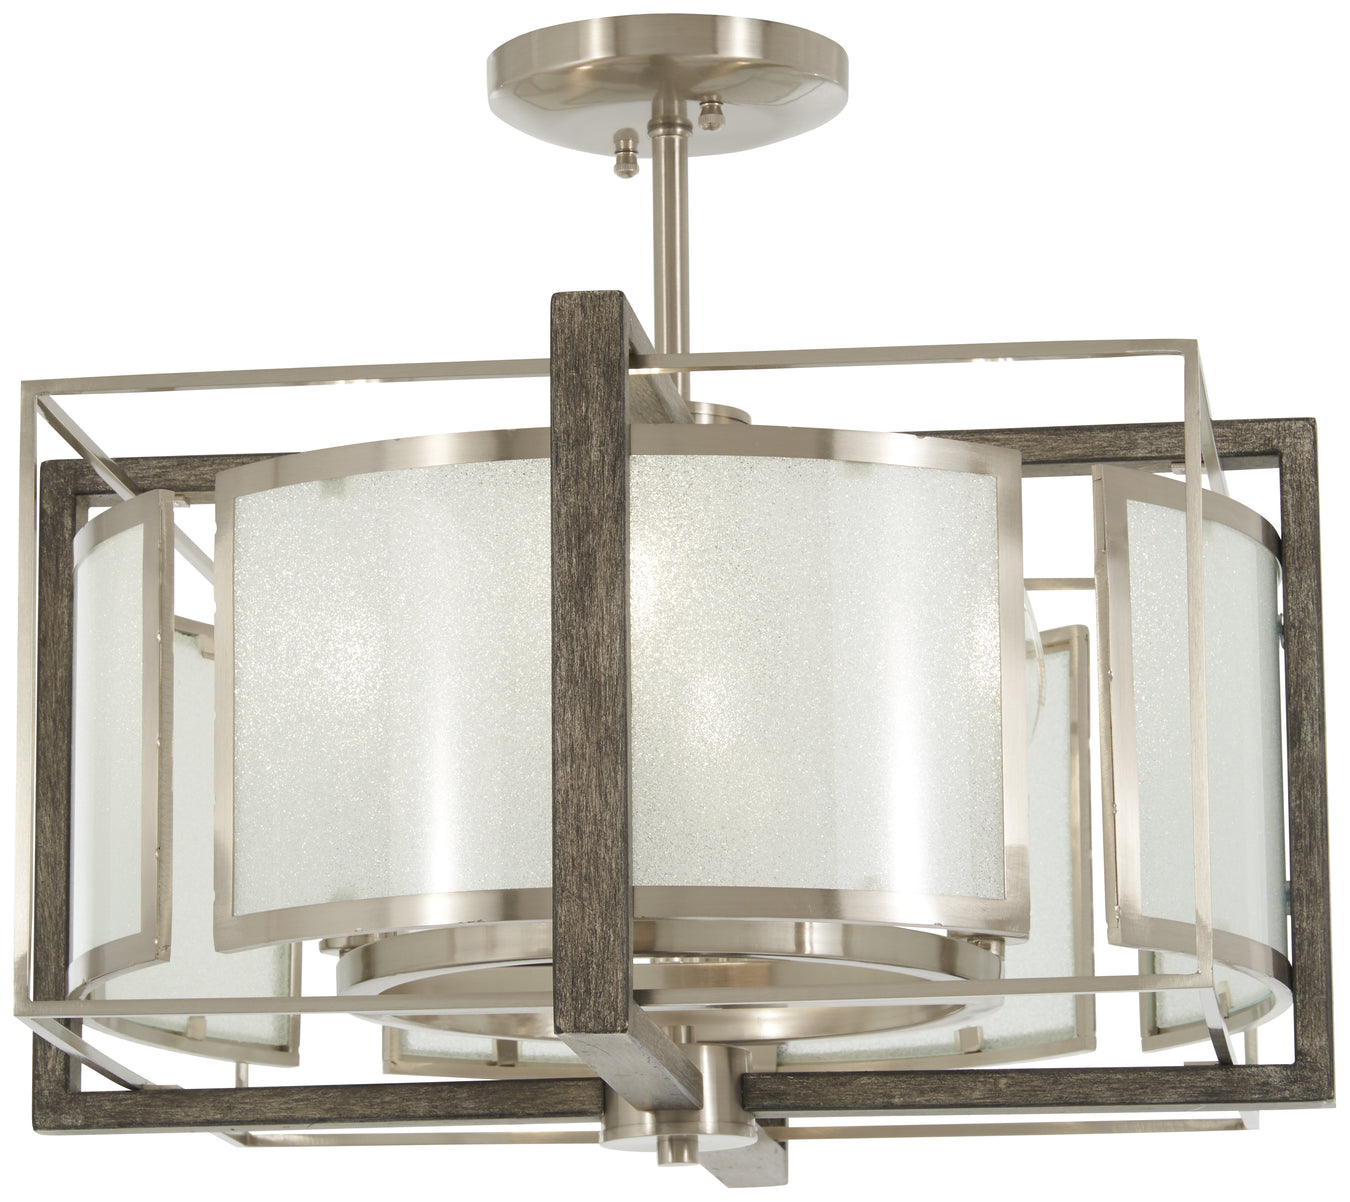 Tyson's Gate 4-Light Pendant/Semi-Flush Mount in Brushed Nickel with Shale Wood & White Iris Glass - Lamps Expo